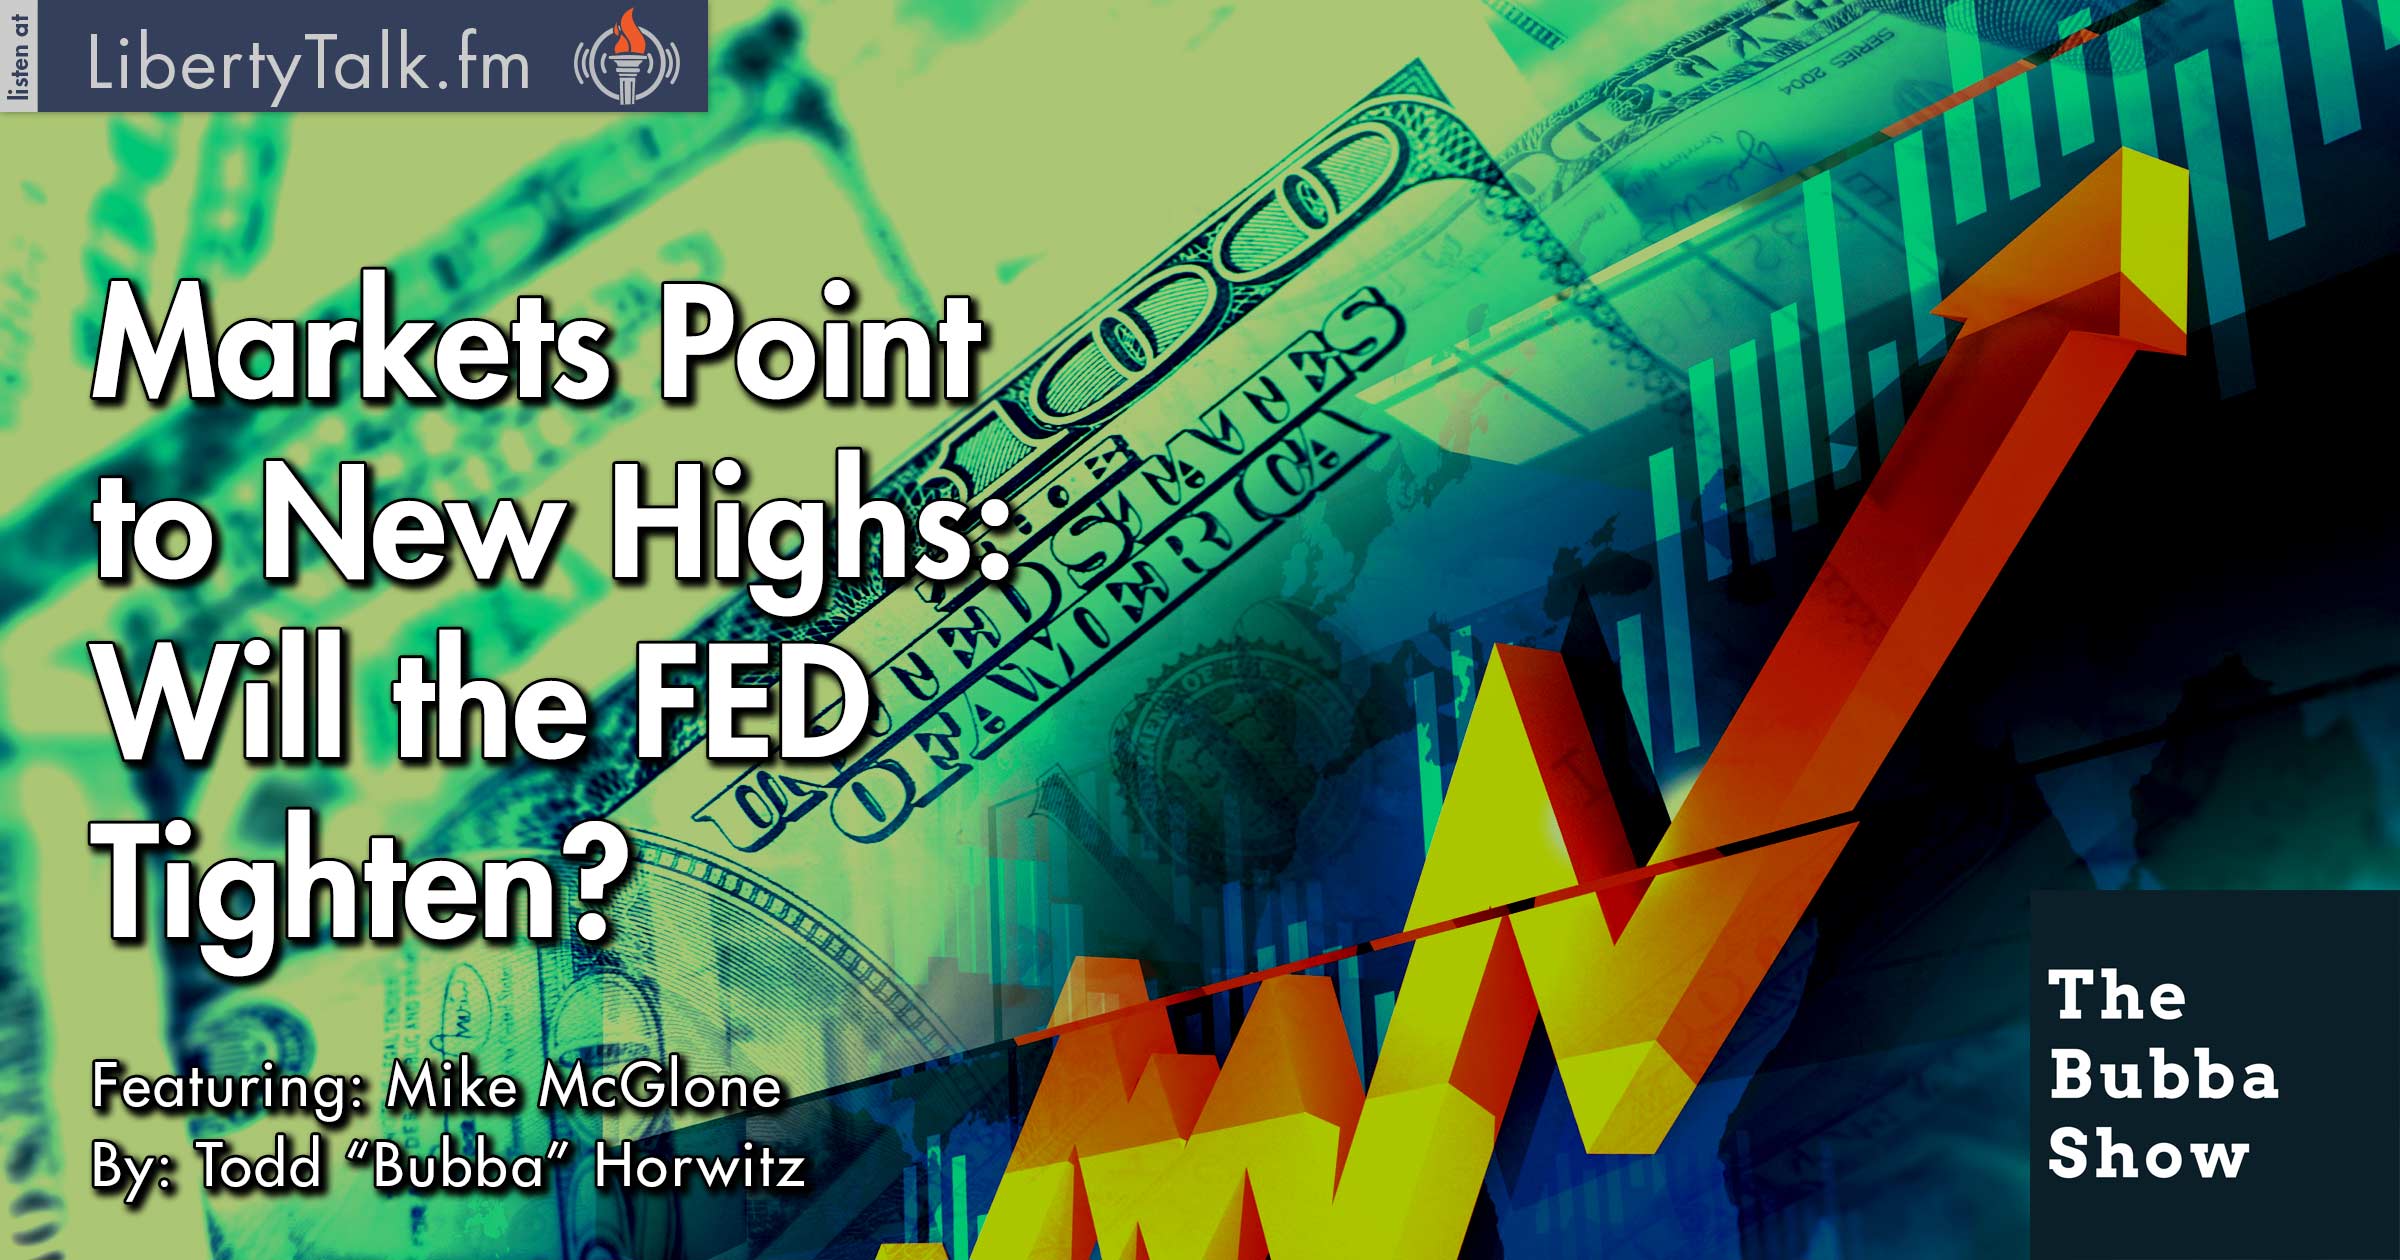 Markets Point to New Highs: Will the FED Tighten? - The Bubba Show